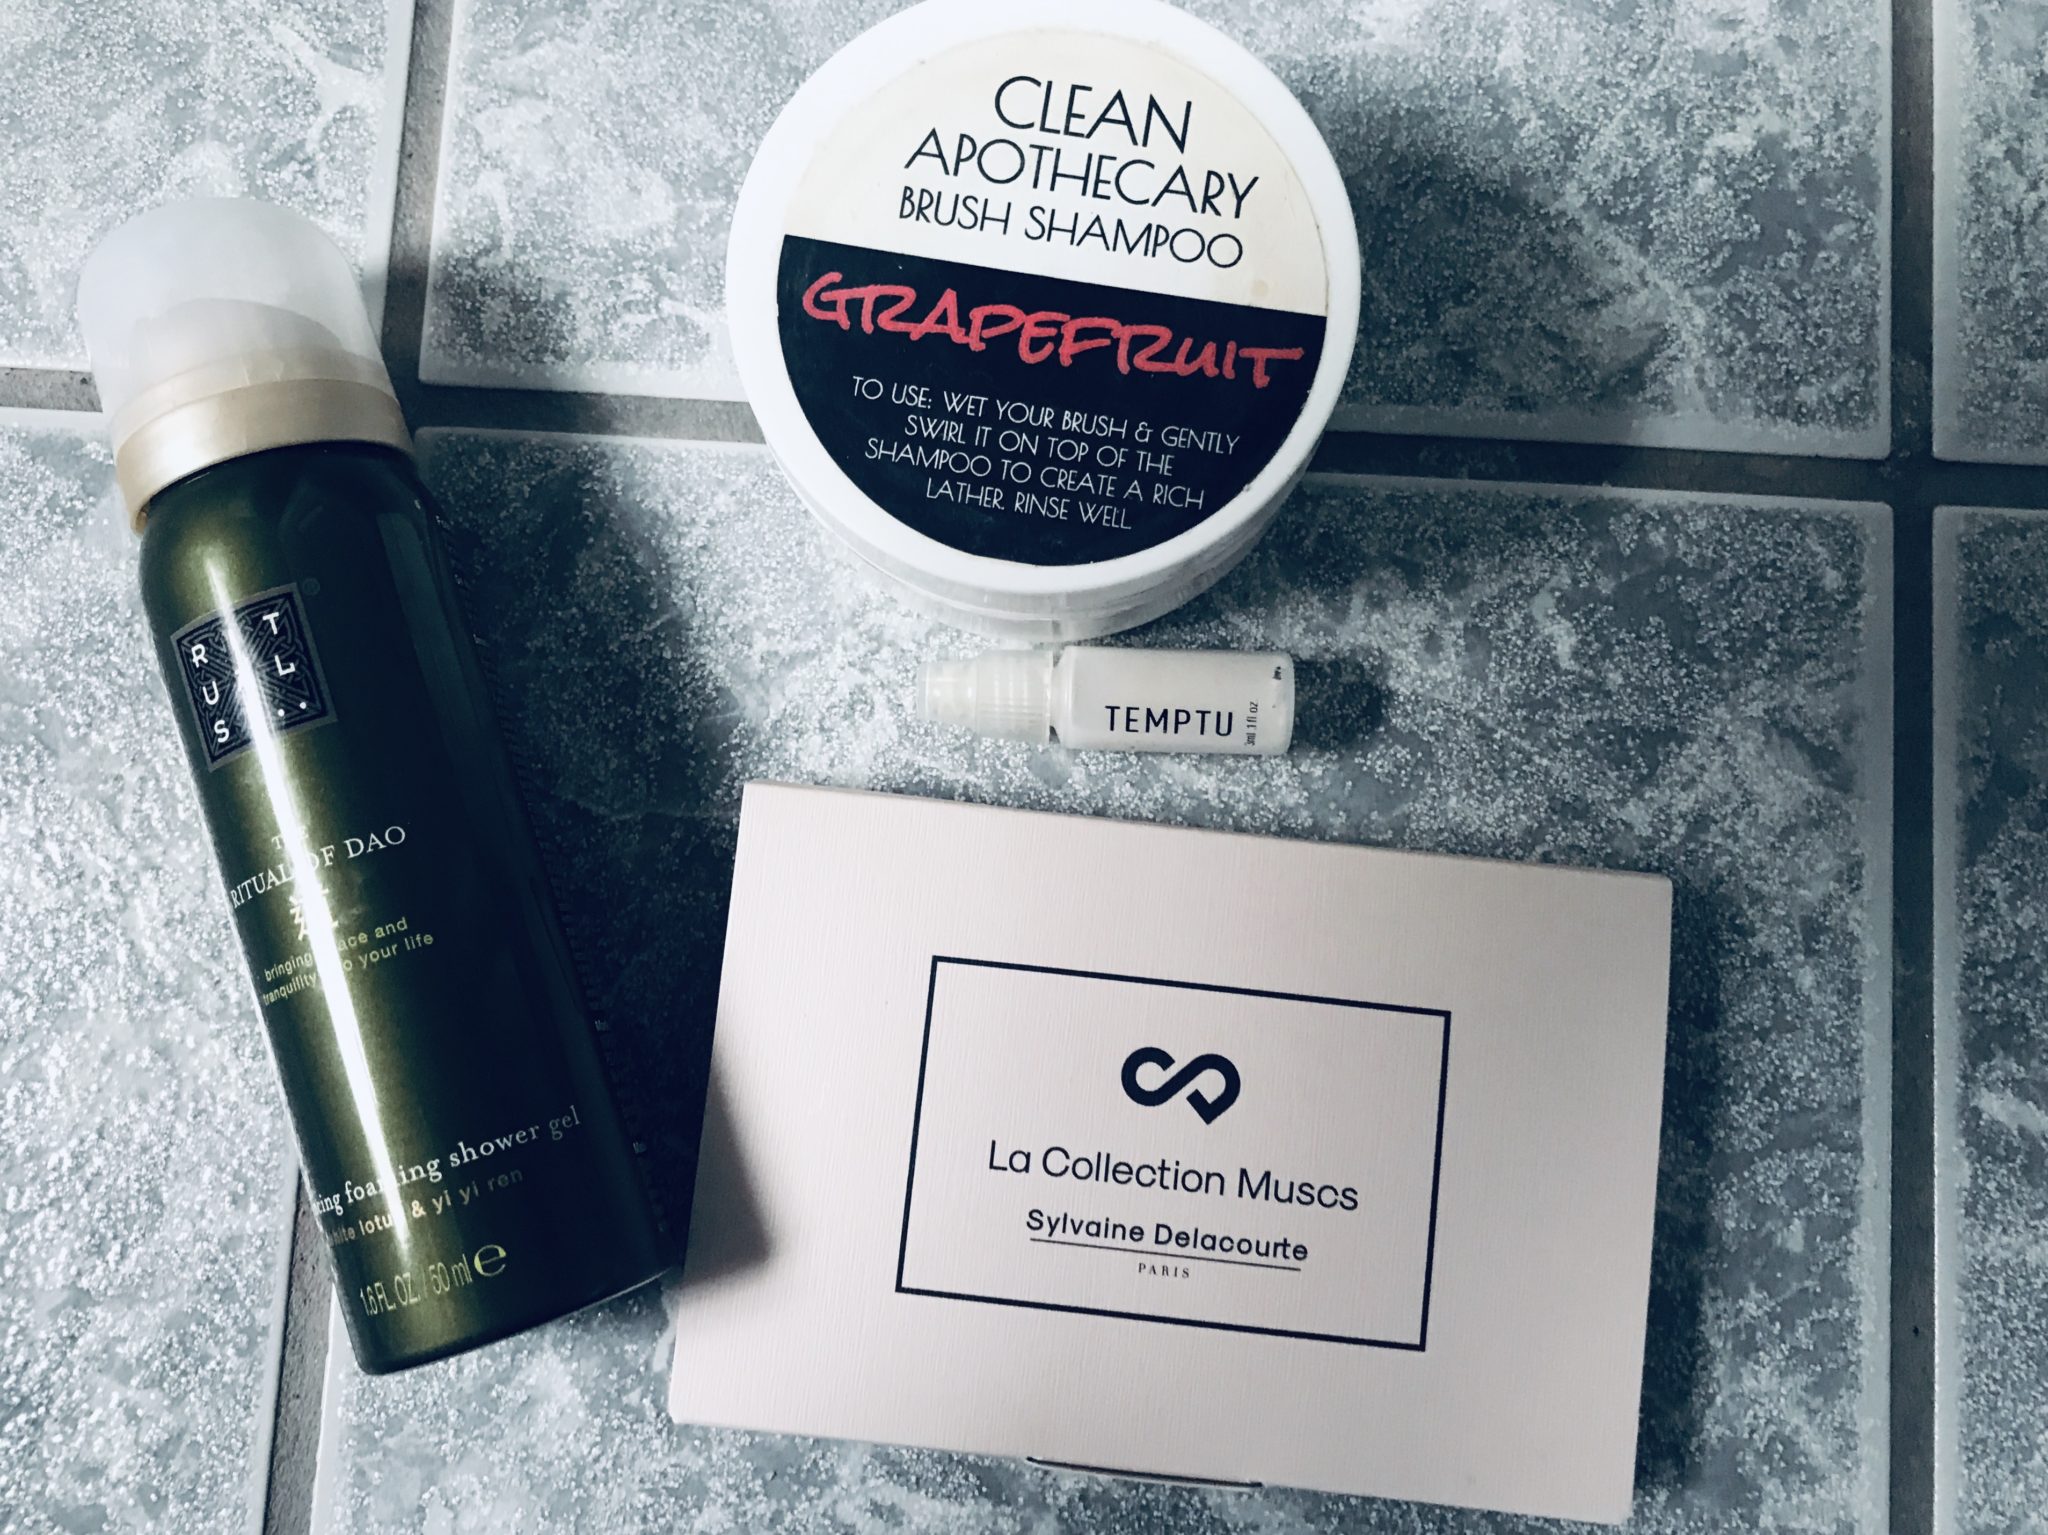 beauty empties: shower foam, brush shampoo and fragrance discovery set emptied in November 2019